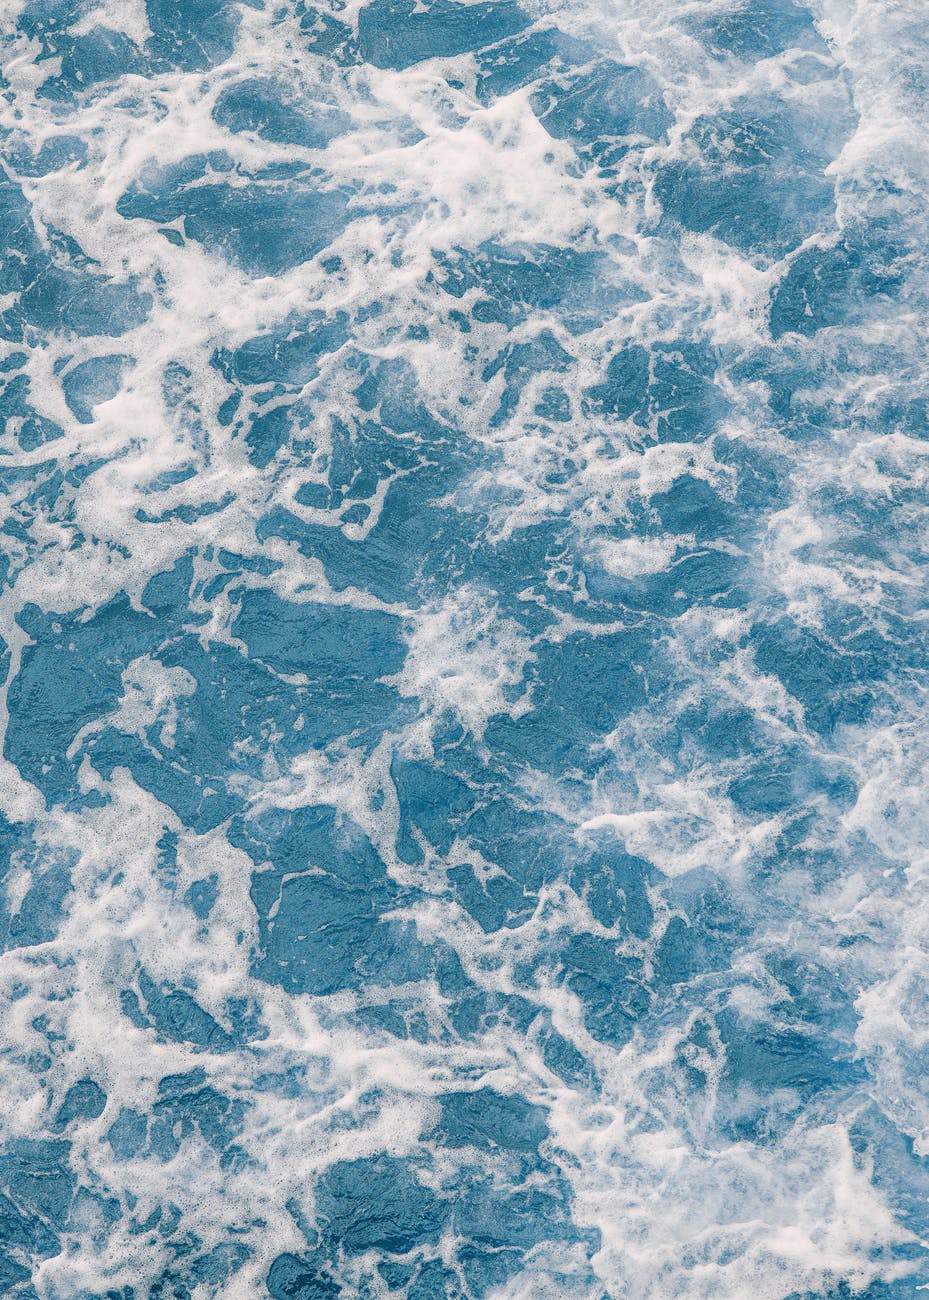 Foamy blue sea with powerful waves signify the flow state or a creatives place of effortless creation.